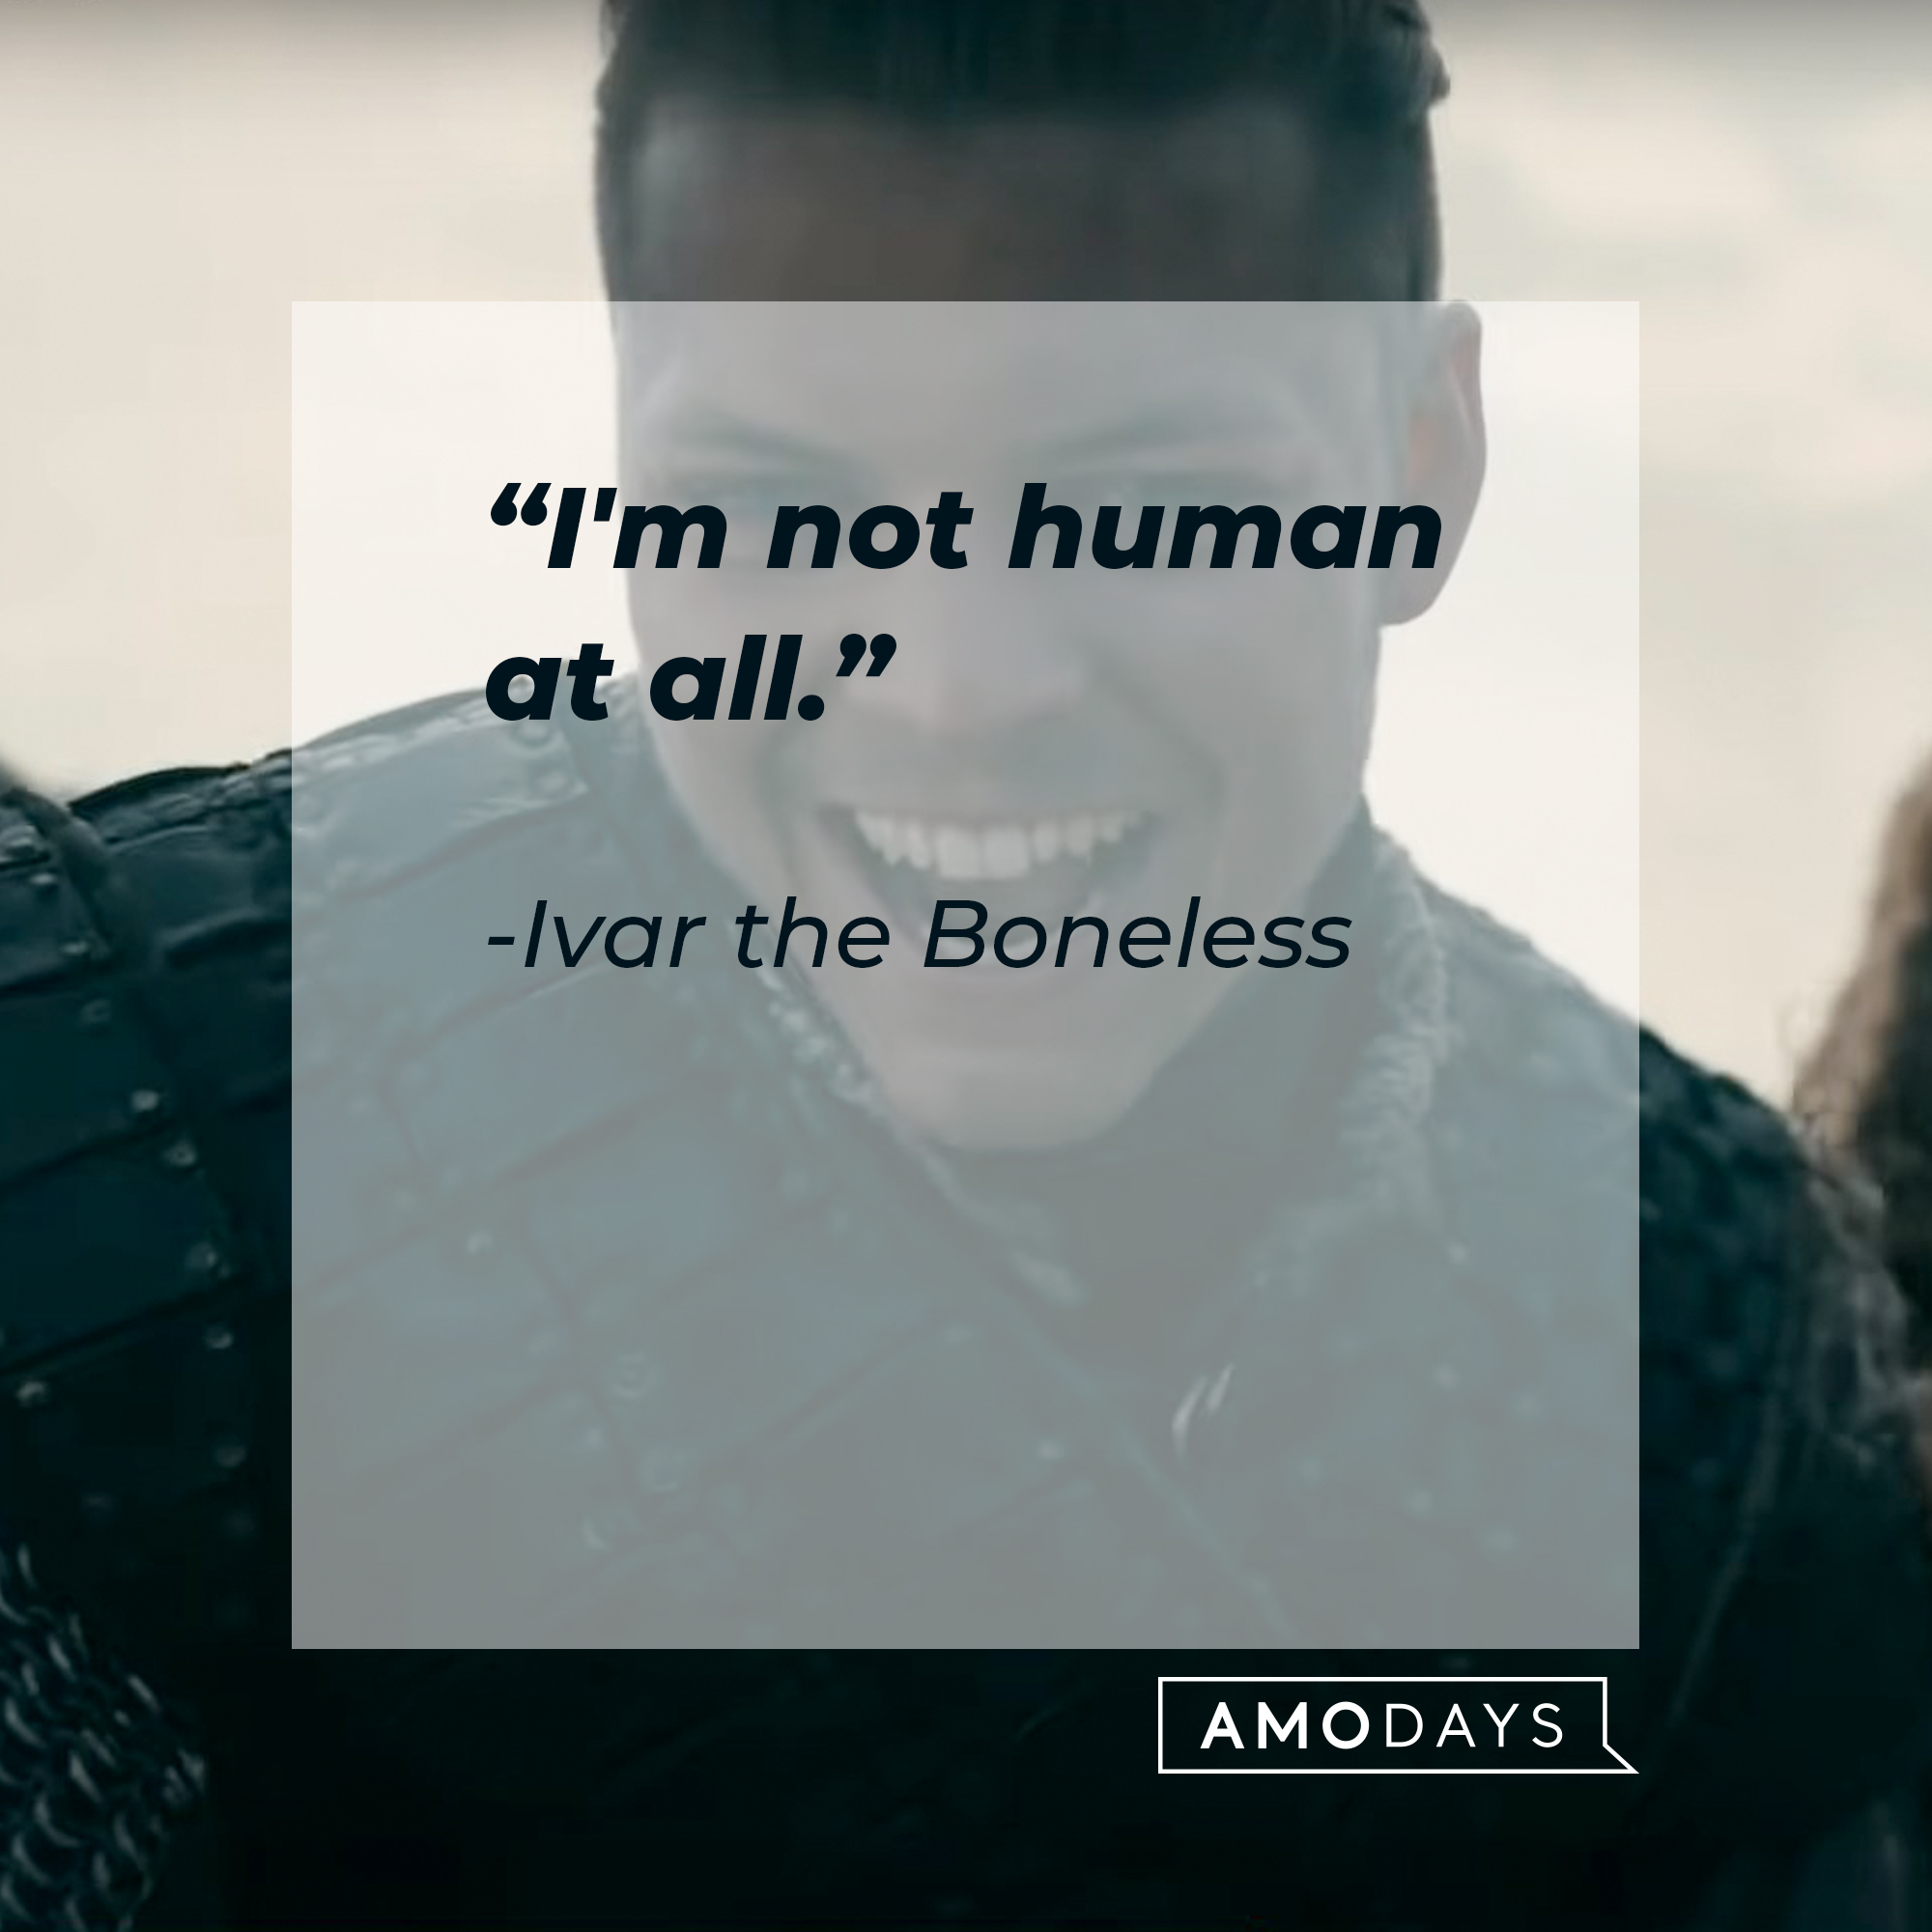 A picture of Ivar the Boneless with his quote: “I'm not human at all.”┃Source: youtube.com/PrimeVideoUK